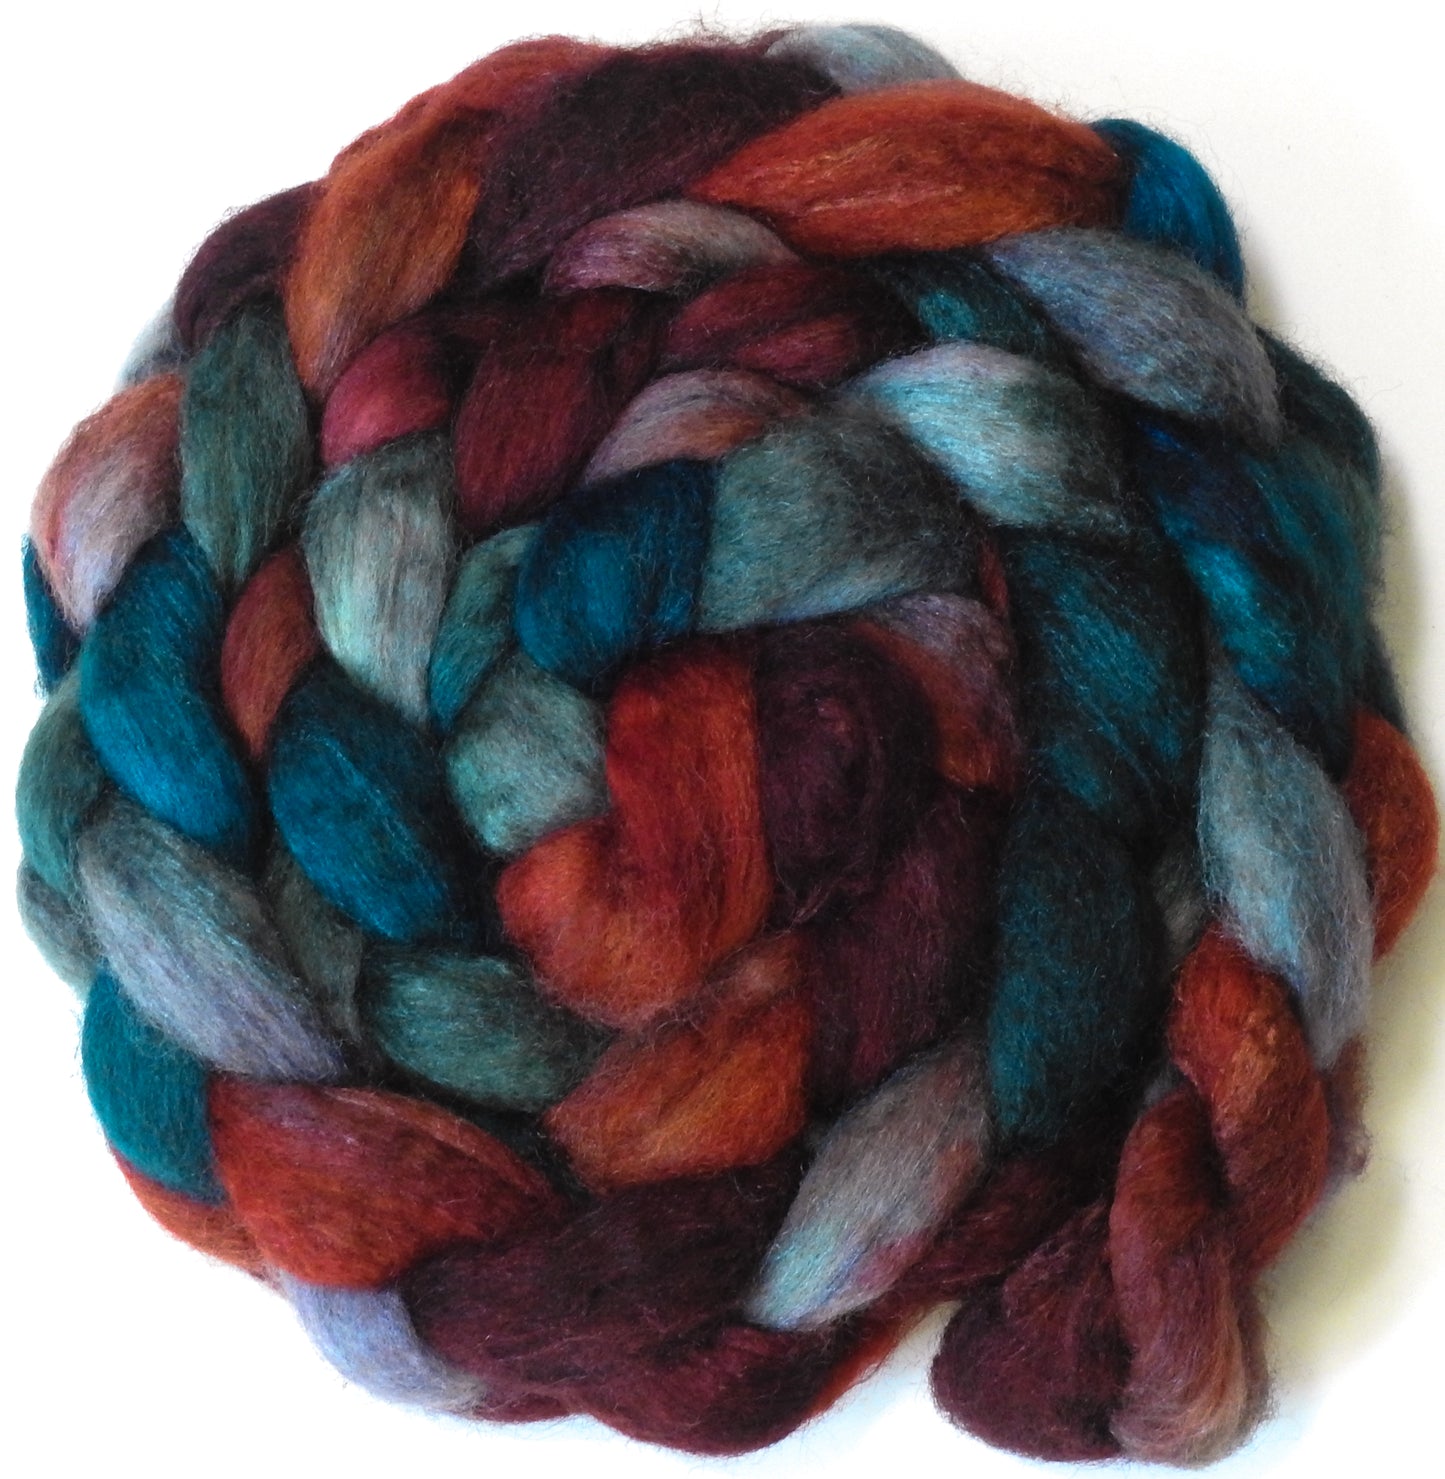 Flannel - Blue-faced Leicester/ Tussah Silk (75/25)